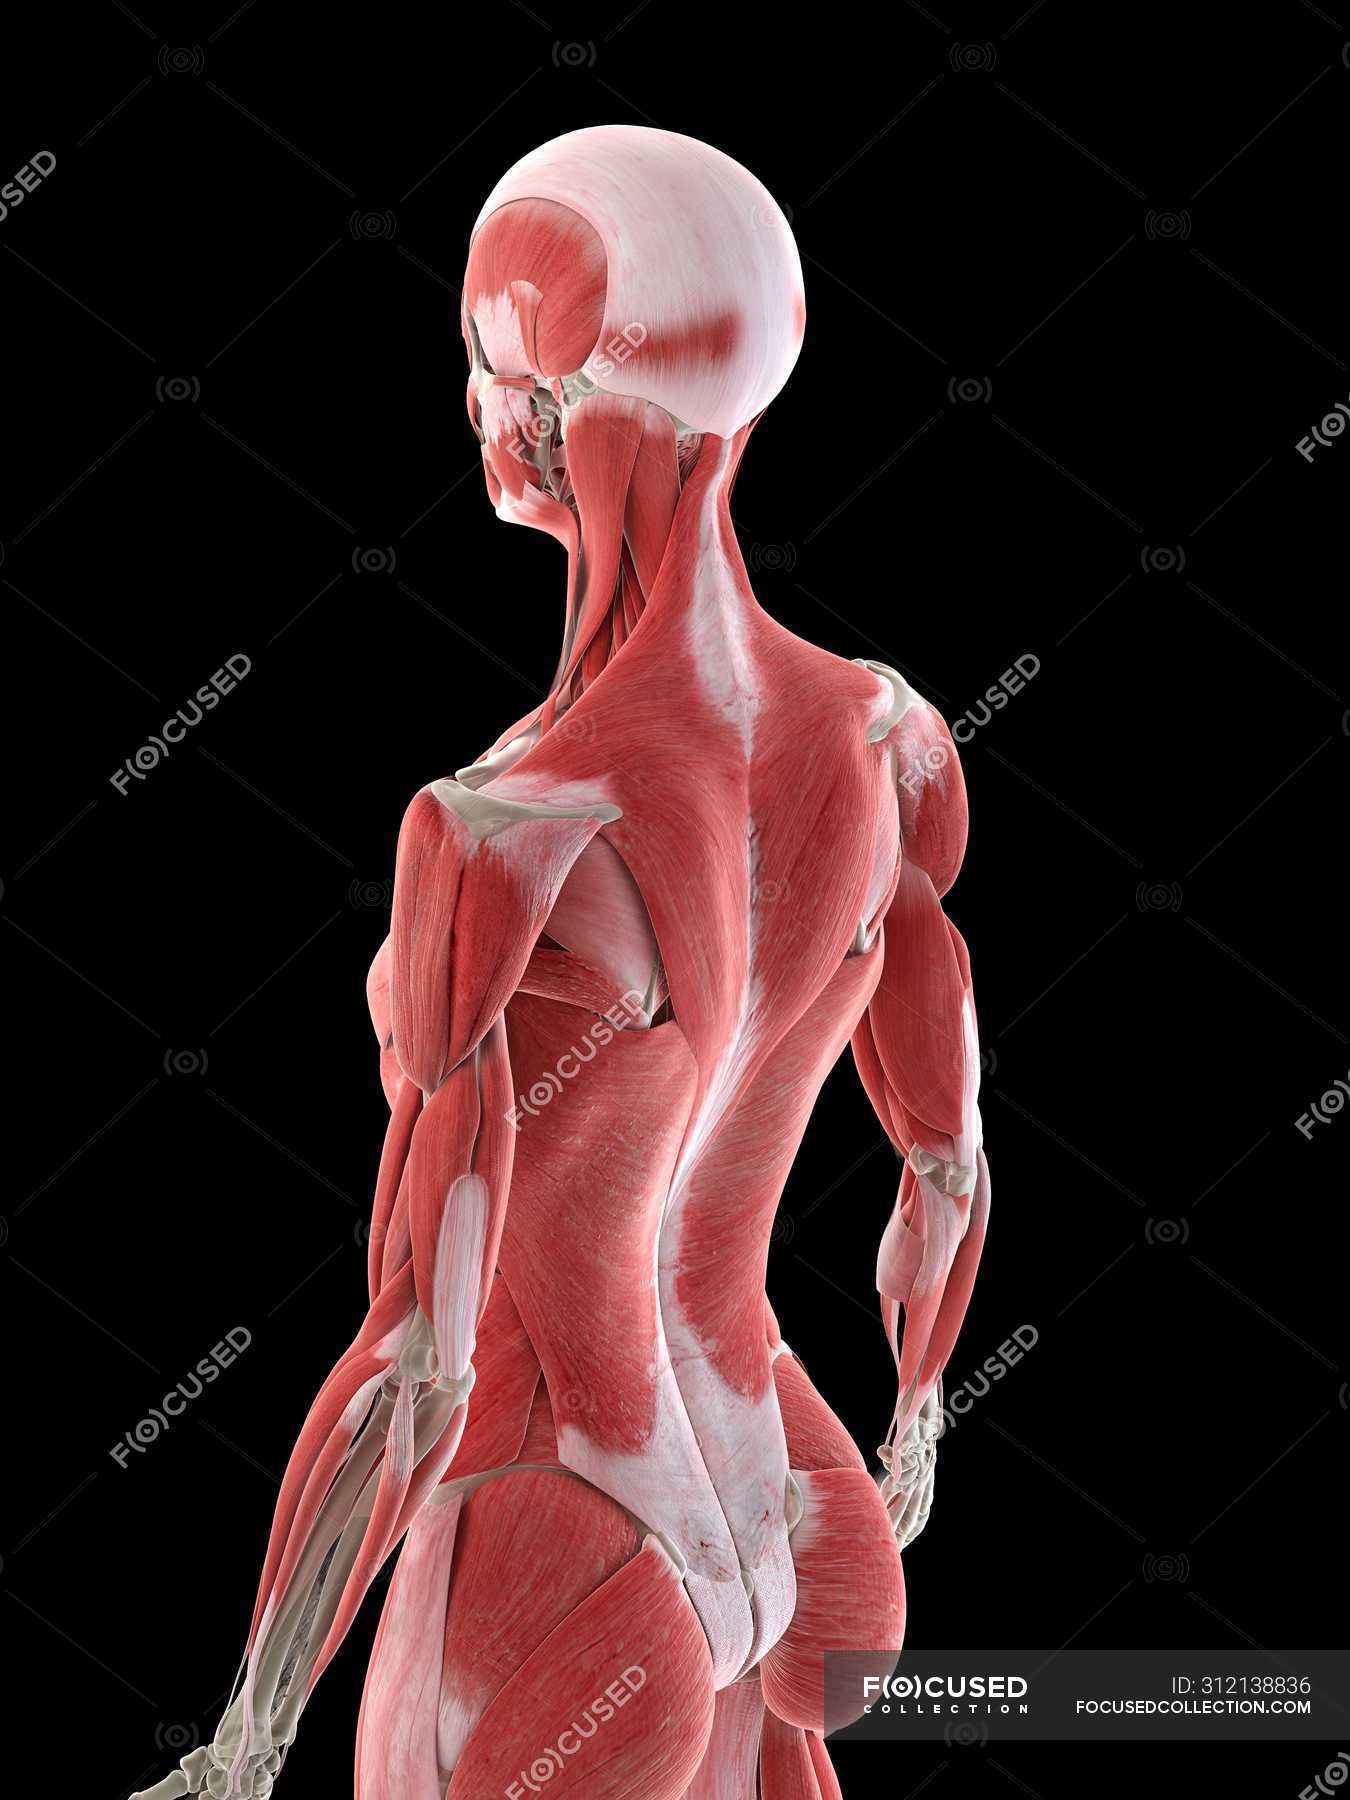 Female Anatomy Showing Back Muscles Computer Illustration Internal 3d Model Stock Photo 312138836